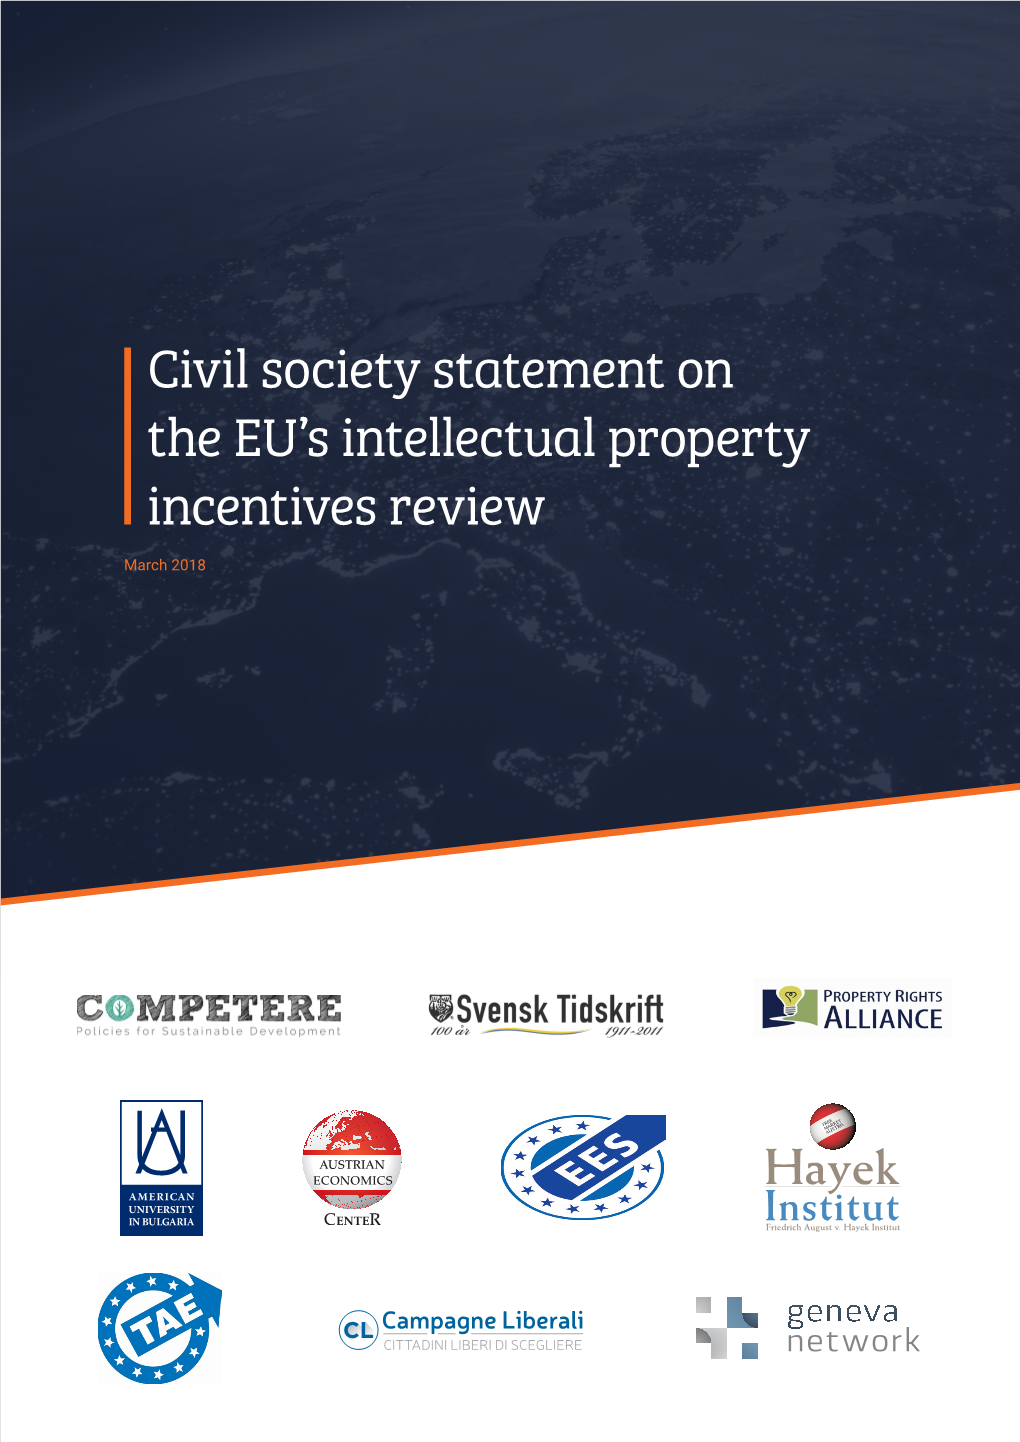 Civil Society Statement on the EU's Intellectual Property Incentives Review